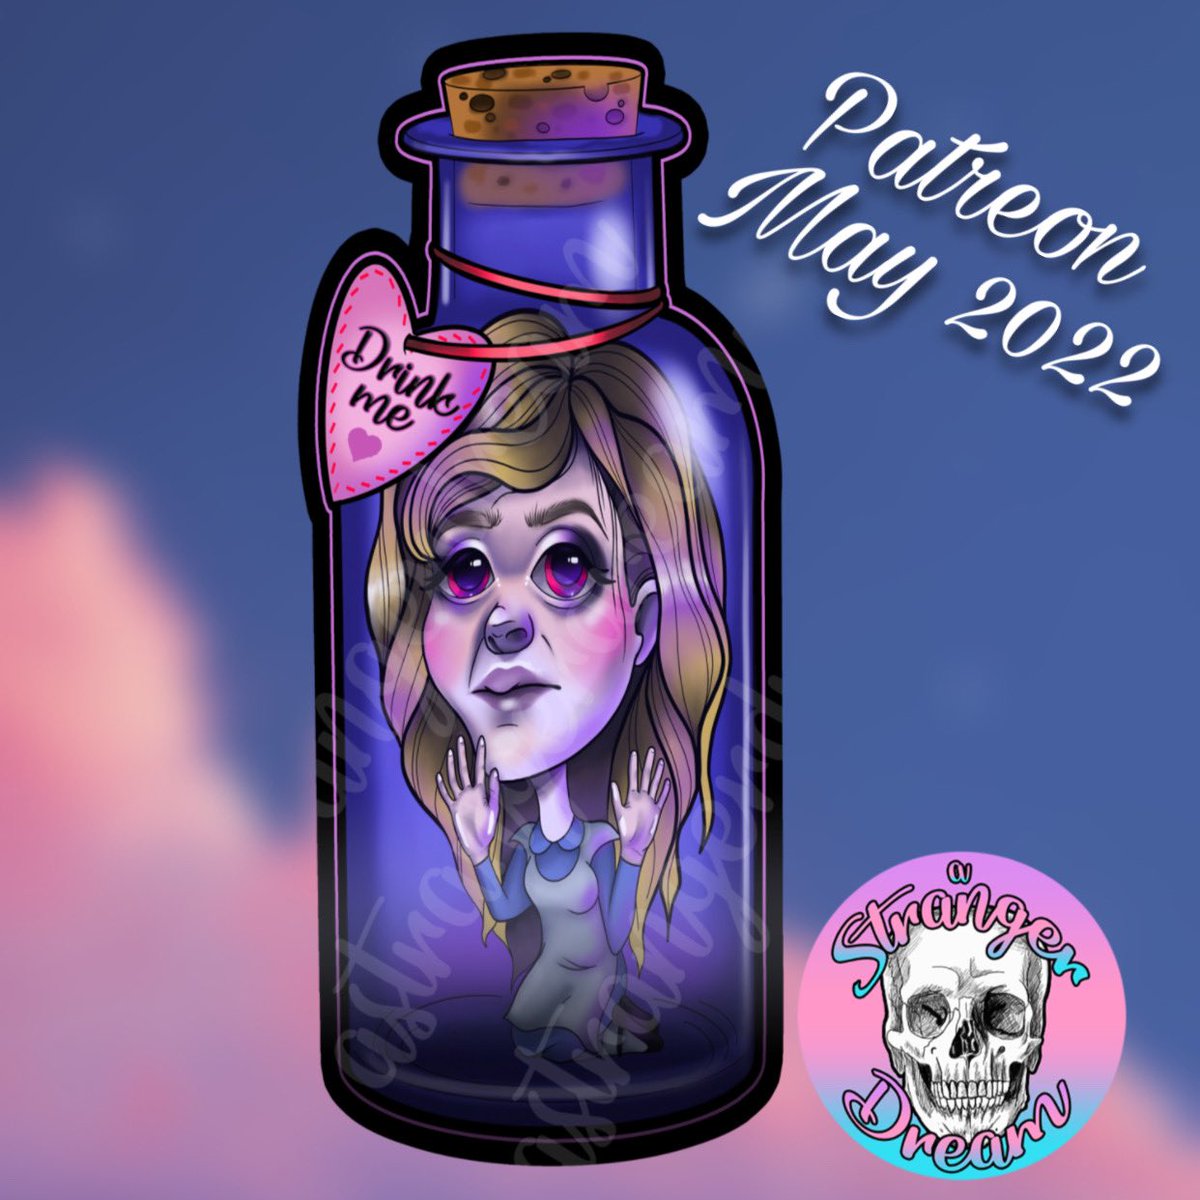 May’s EXCLUSIVE Patreon bookmark is Alice in a Bottle! Sign up before May 1st to get your hands on this one! patreon.com/astrangerdream